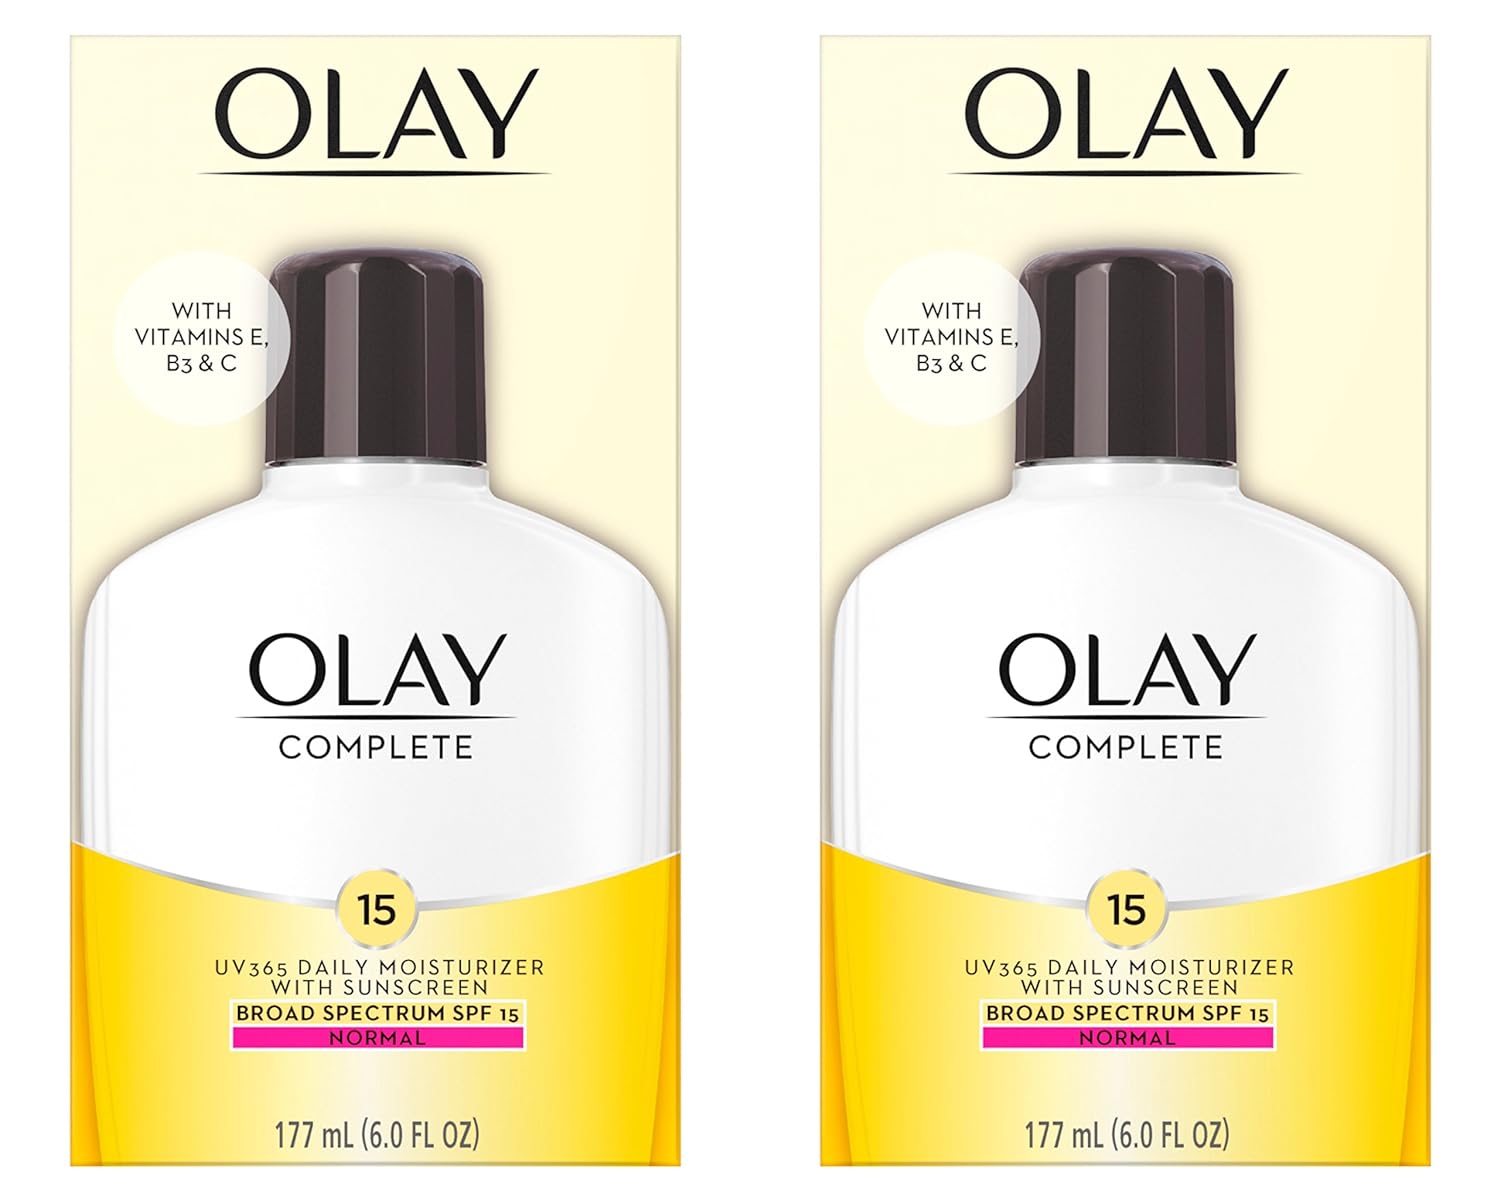 Olay Face Moisturizer Complete Lotion All Day…